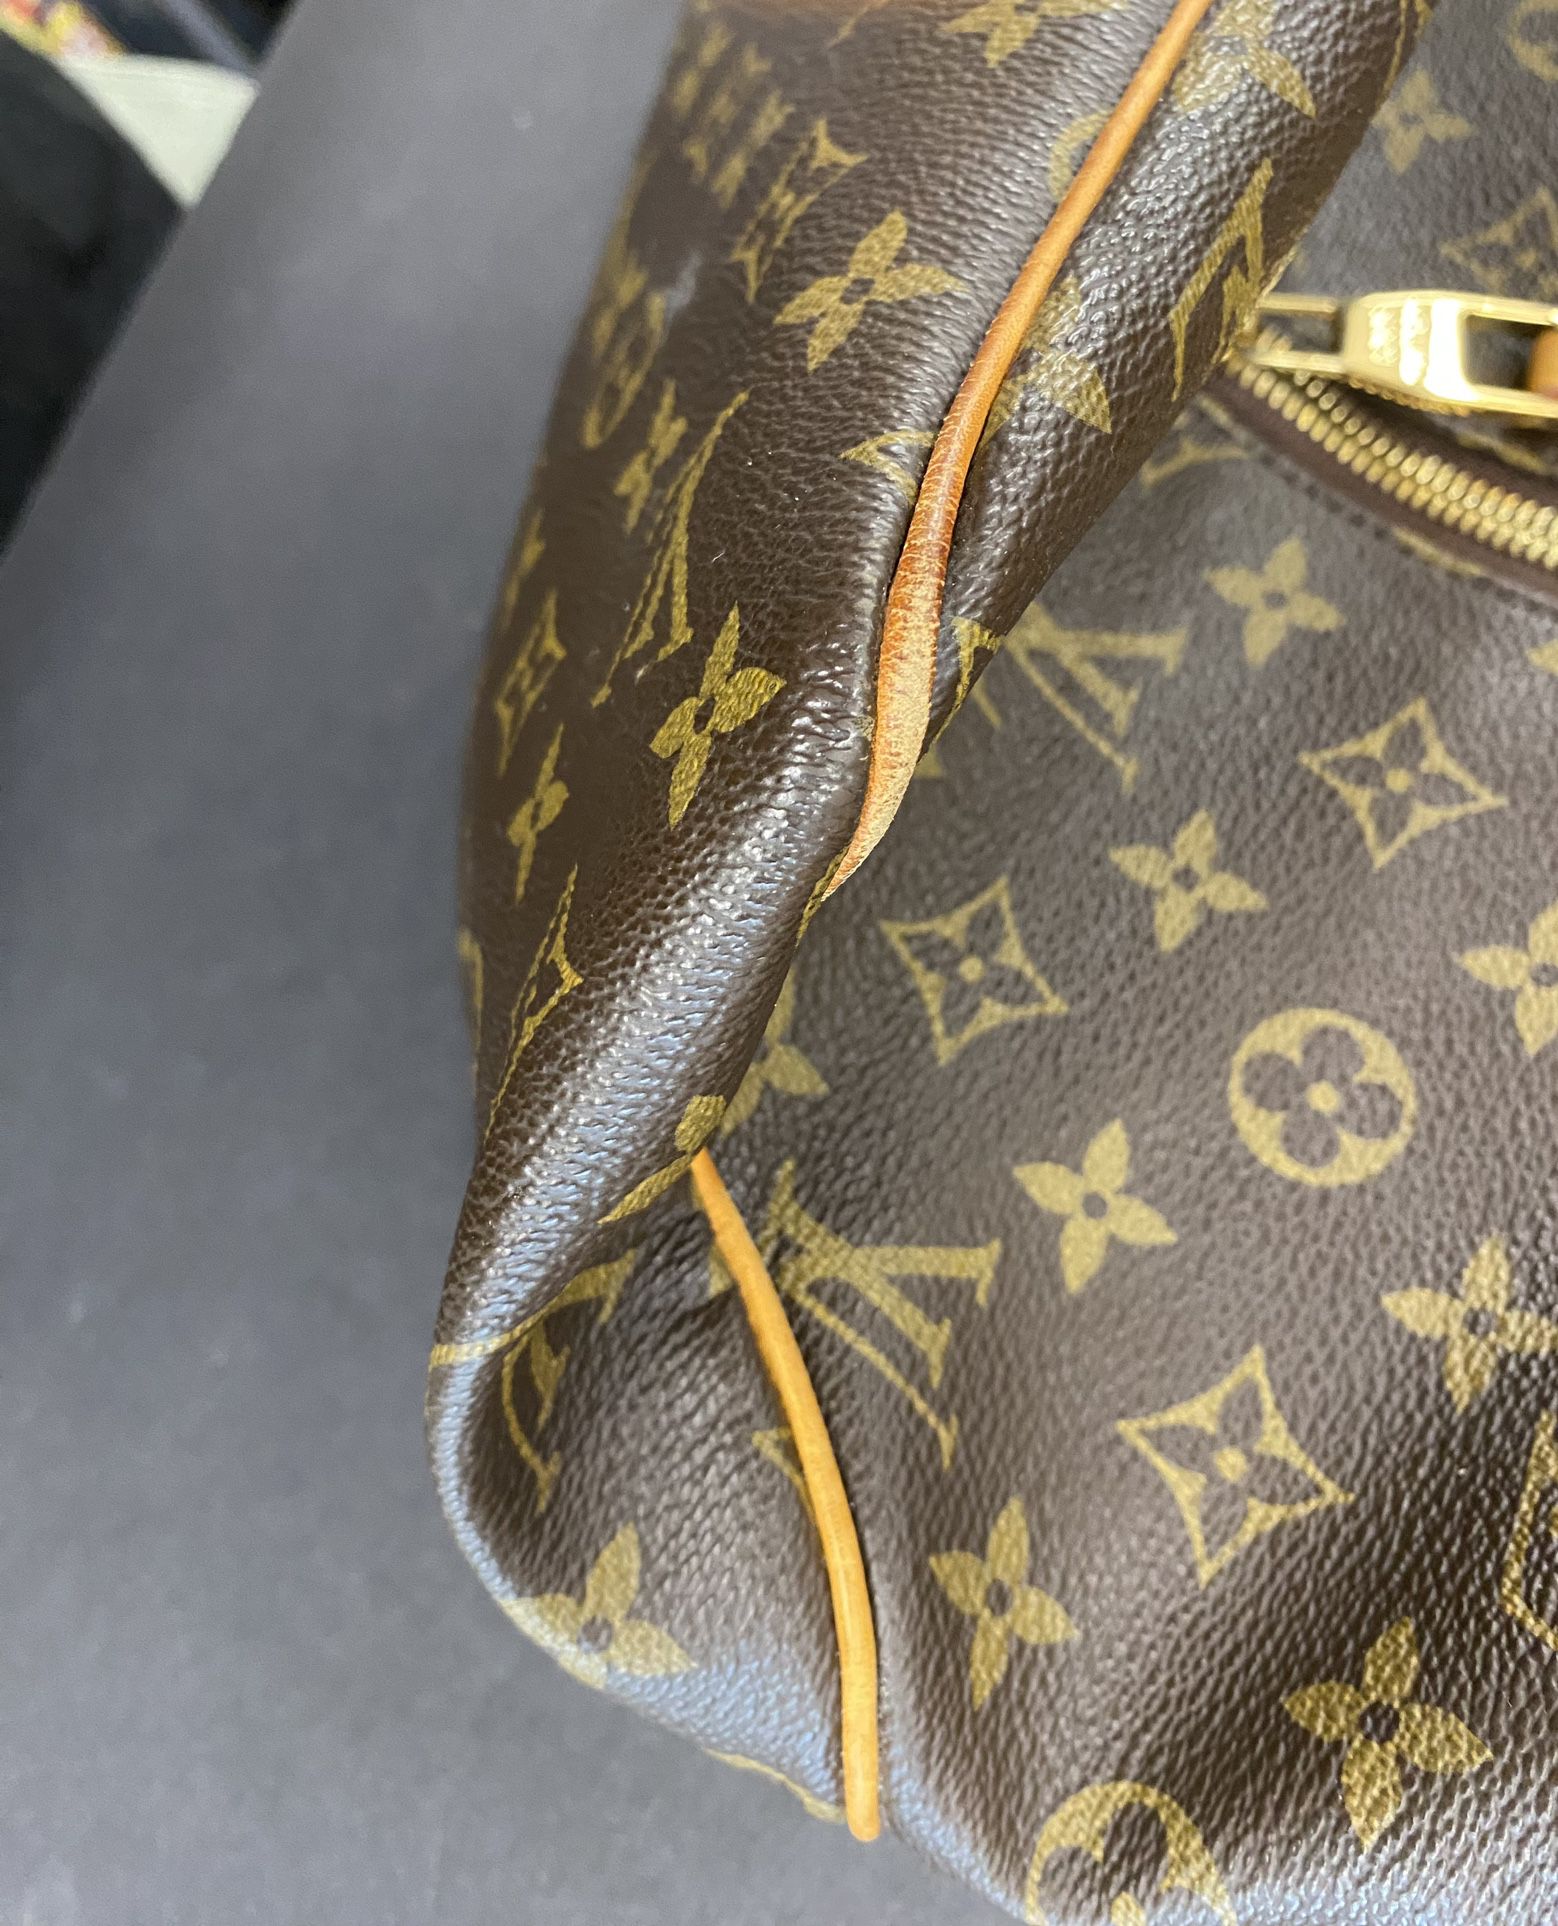 Louis Vuitton Delightful NM AUTHENTIC for Sale in Los Angeles, CA - OfferUp